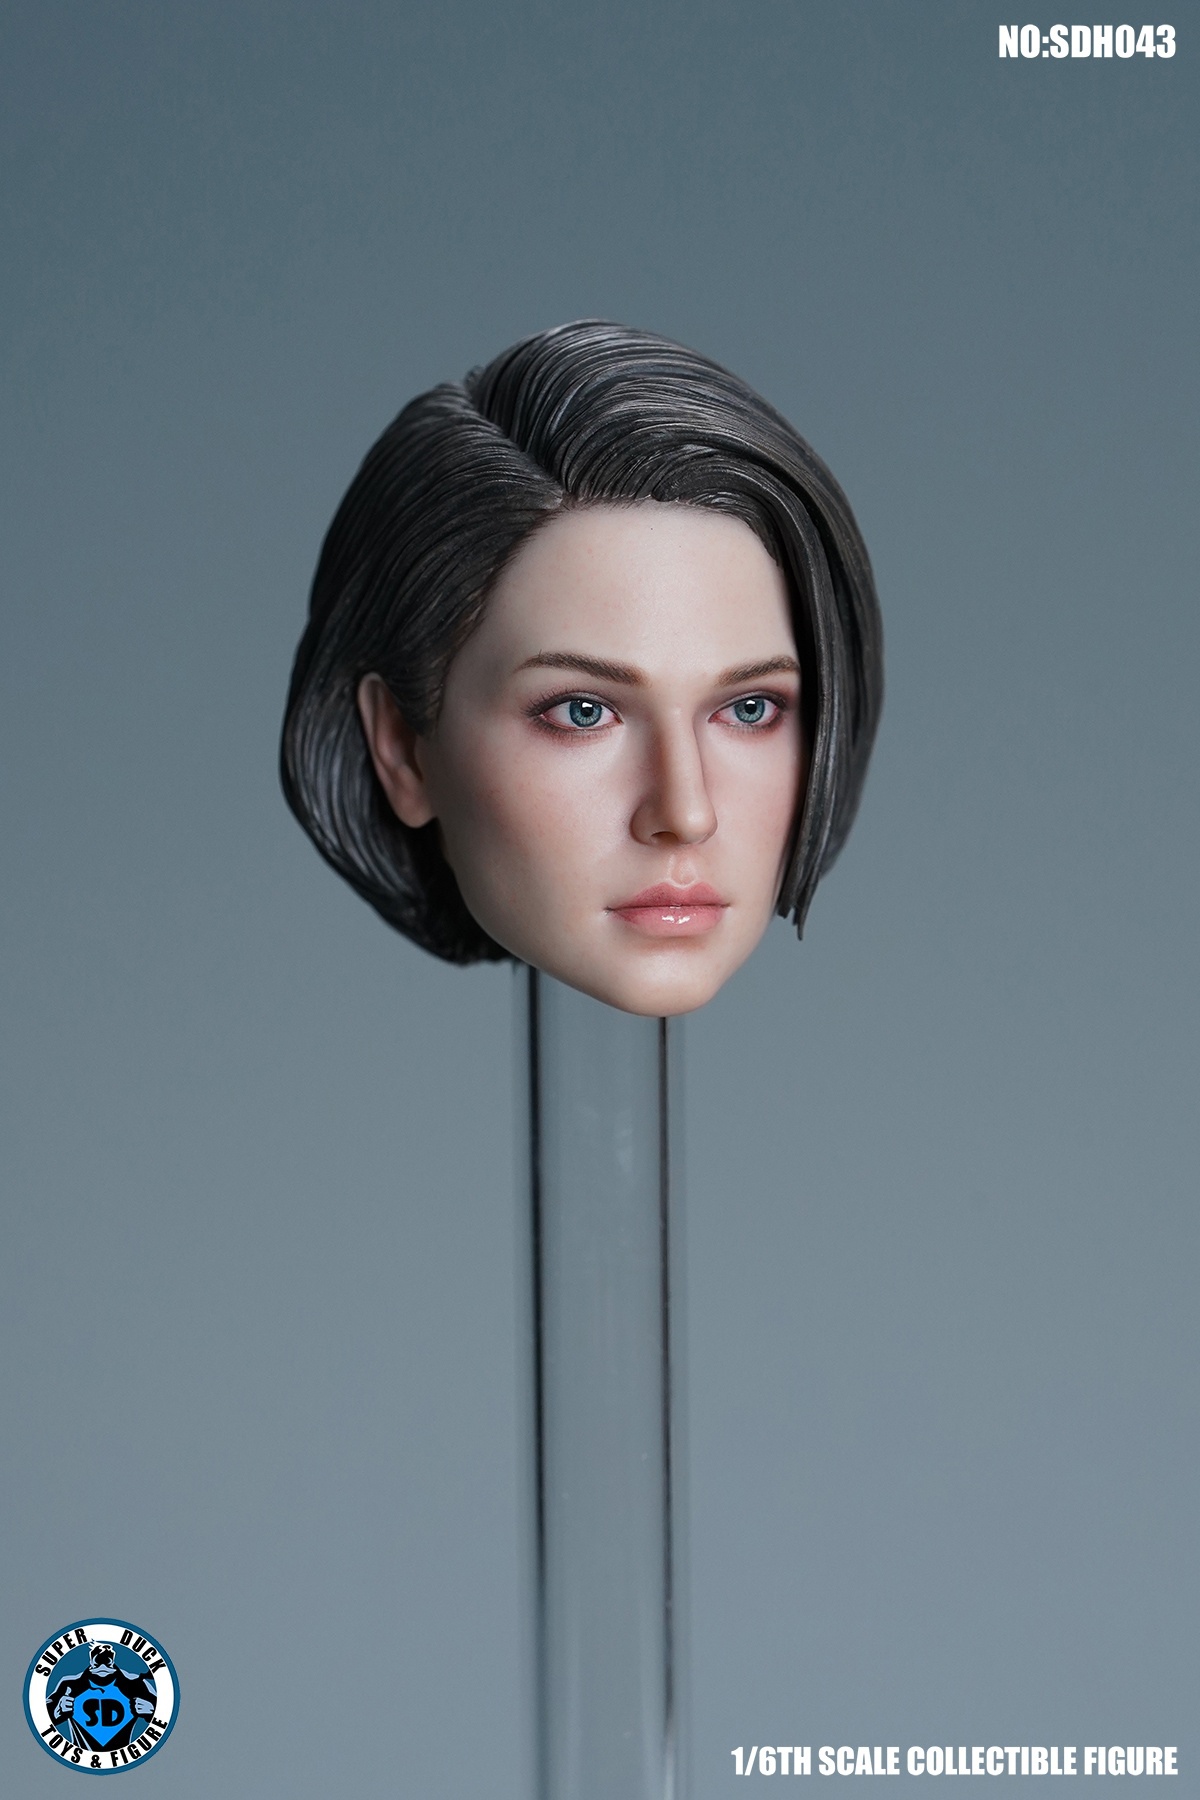 NEW PRODUCT: SUPER DUCK - SDH043 biochemical policewoman head carving 0688